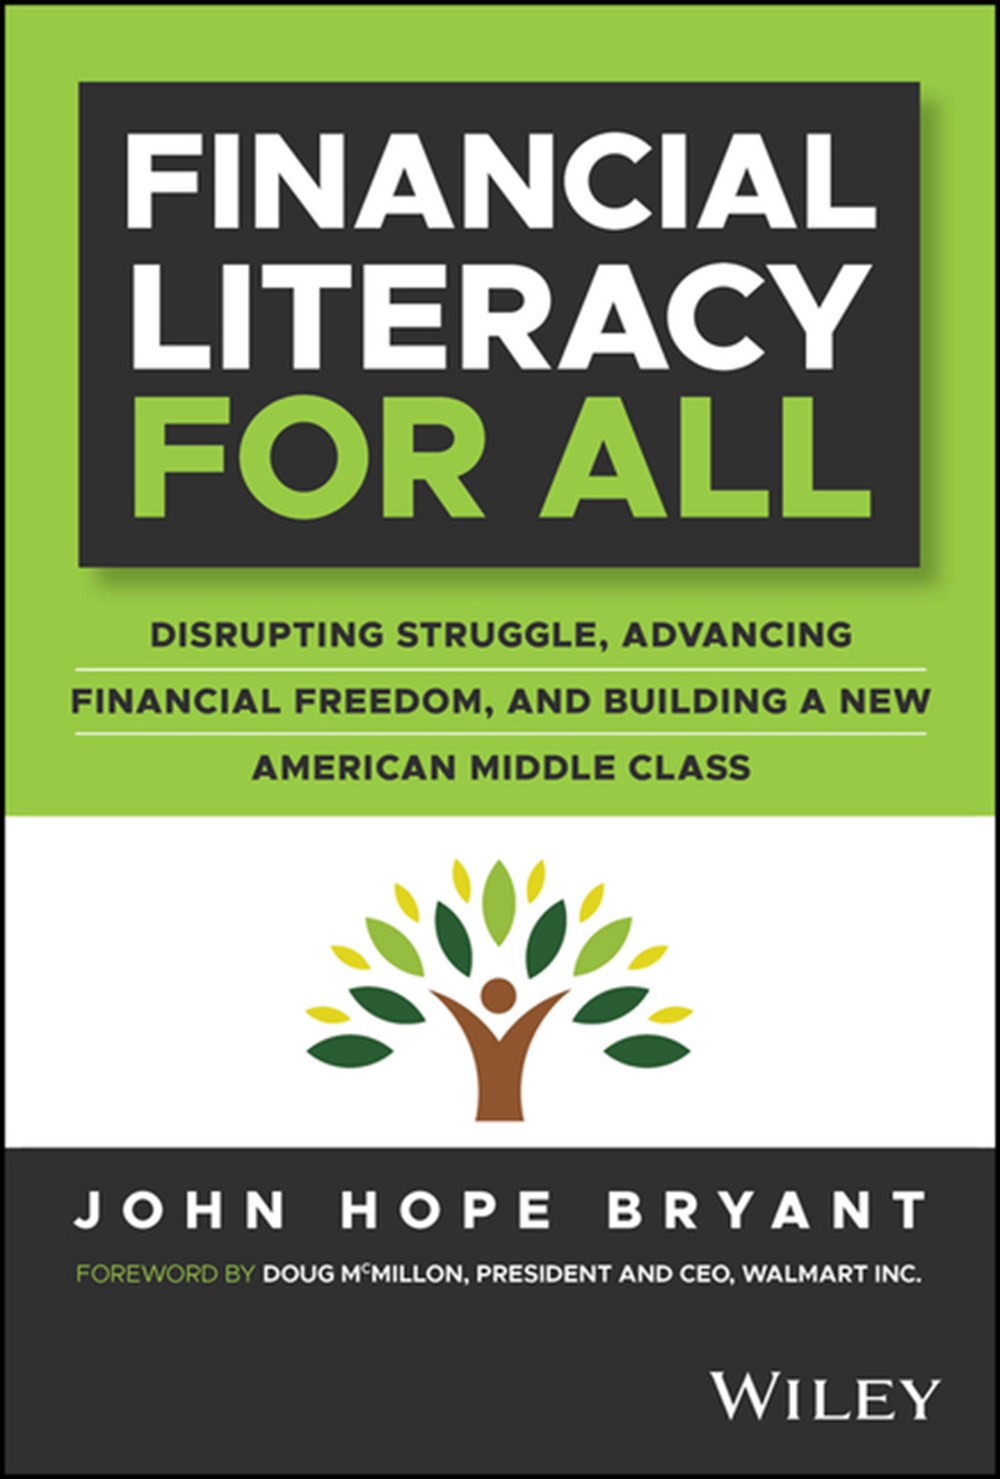 Financial Literacy for All: Disrupting Struggle, Advancing Financial Freedom, and Building a New Ame